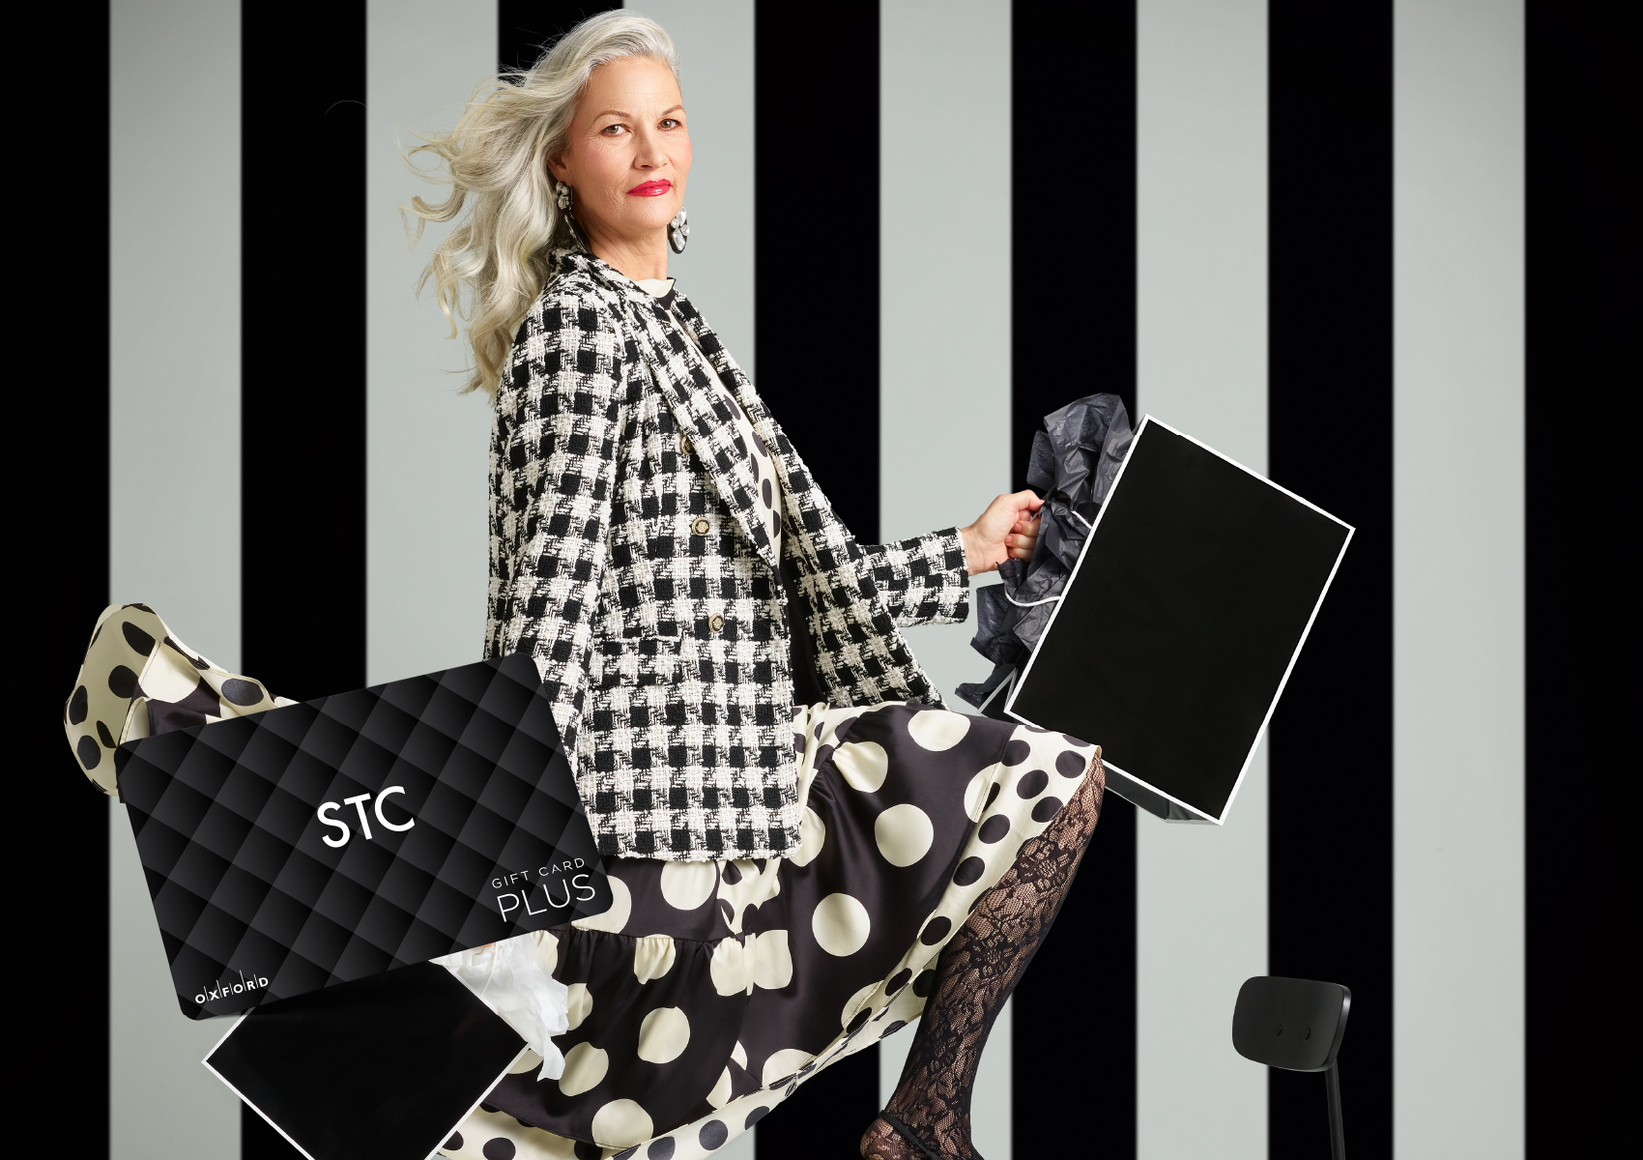 promotional image for a STC gift card. It shows a woman wearing a black and white houndstooth blazer and black and white polka dot skirt holding black and white shopping bags. A STC gift card is also in the image